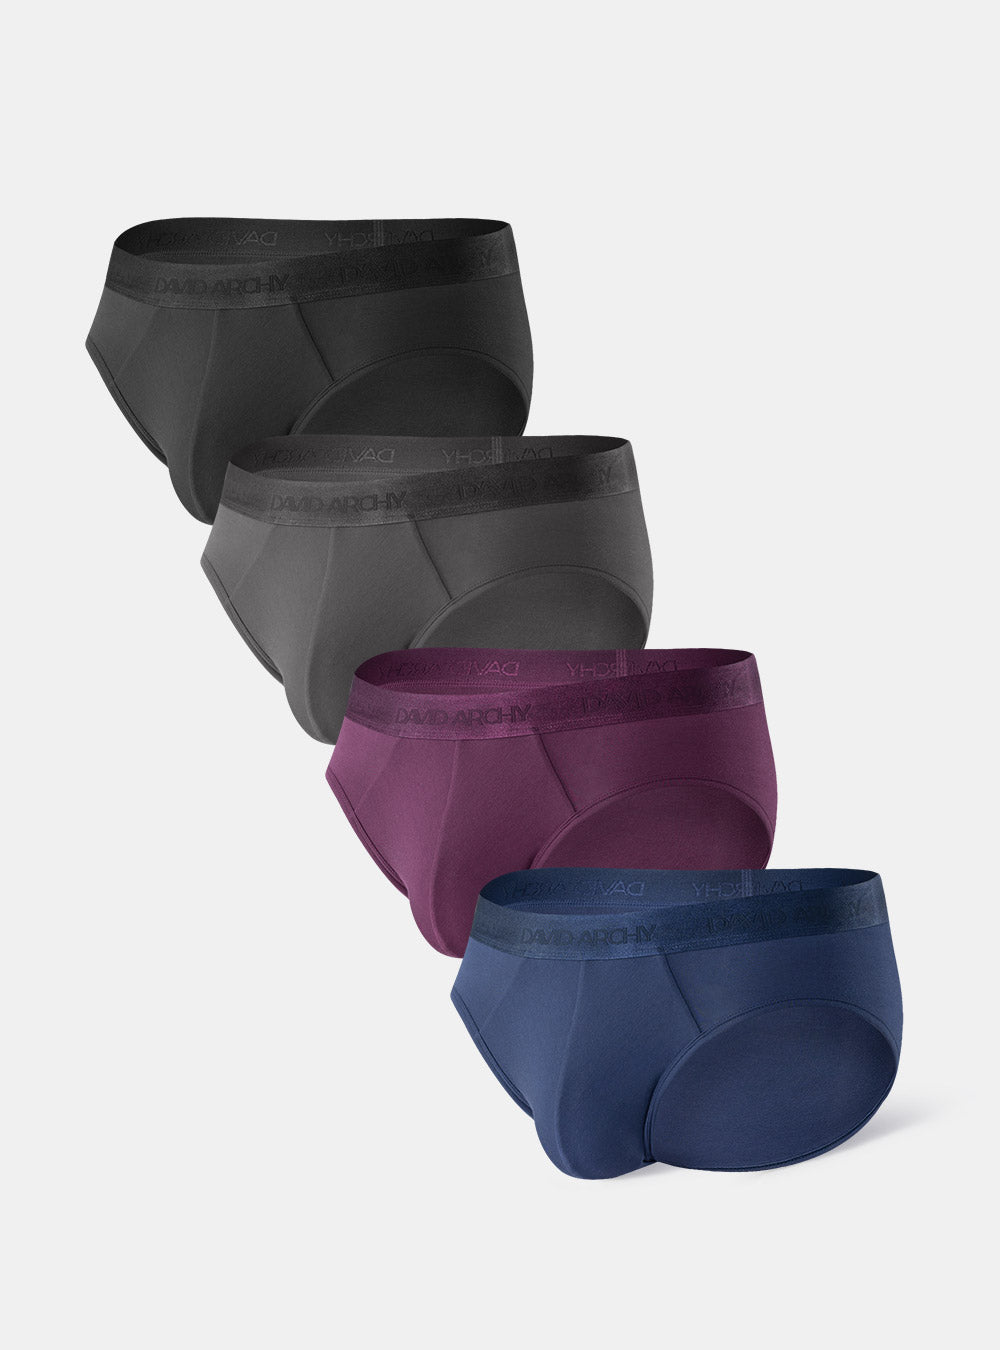 What Is The Most Comfortable Mens Underwear?